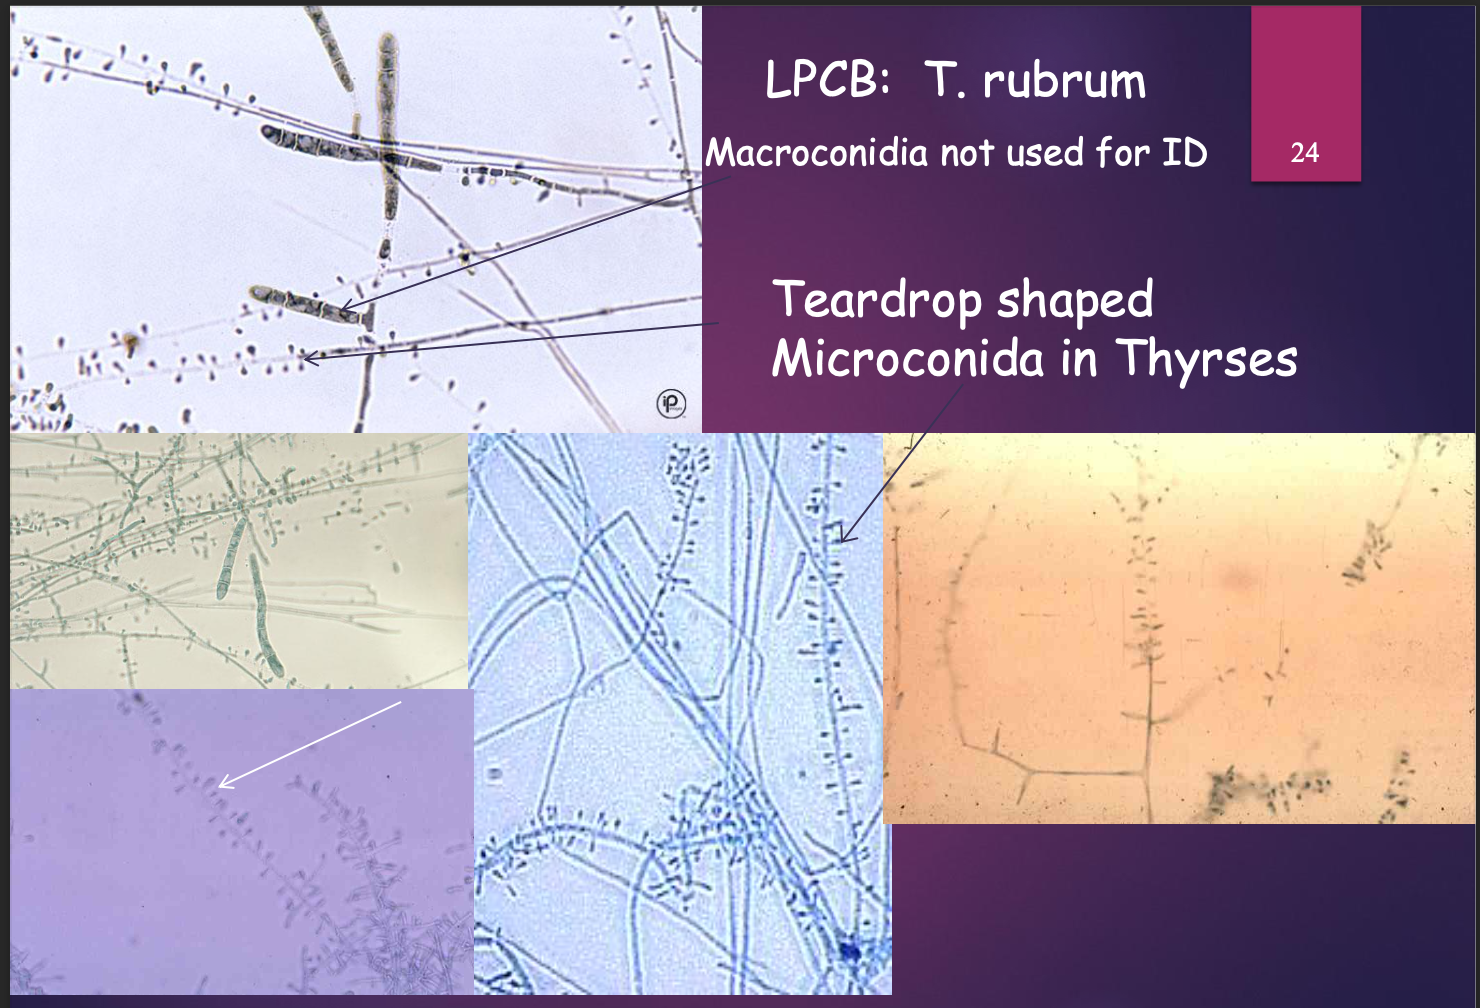 <p>Dermatophytes microscopic &amp; colony ID: Trichophyton rubrum. Label the structures found in dermatophyte microscopic image</p>